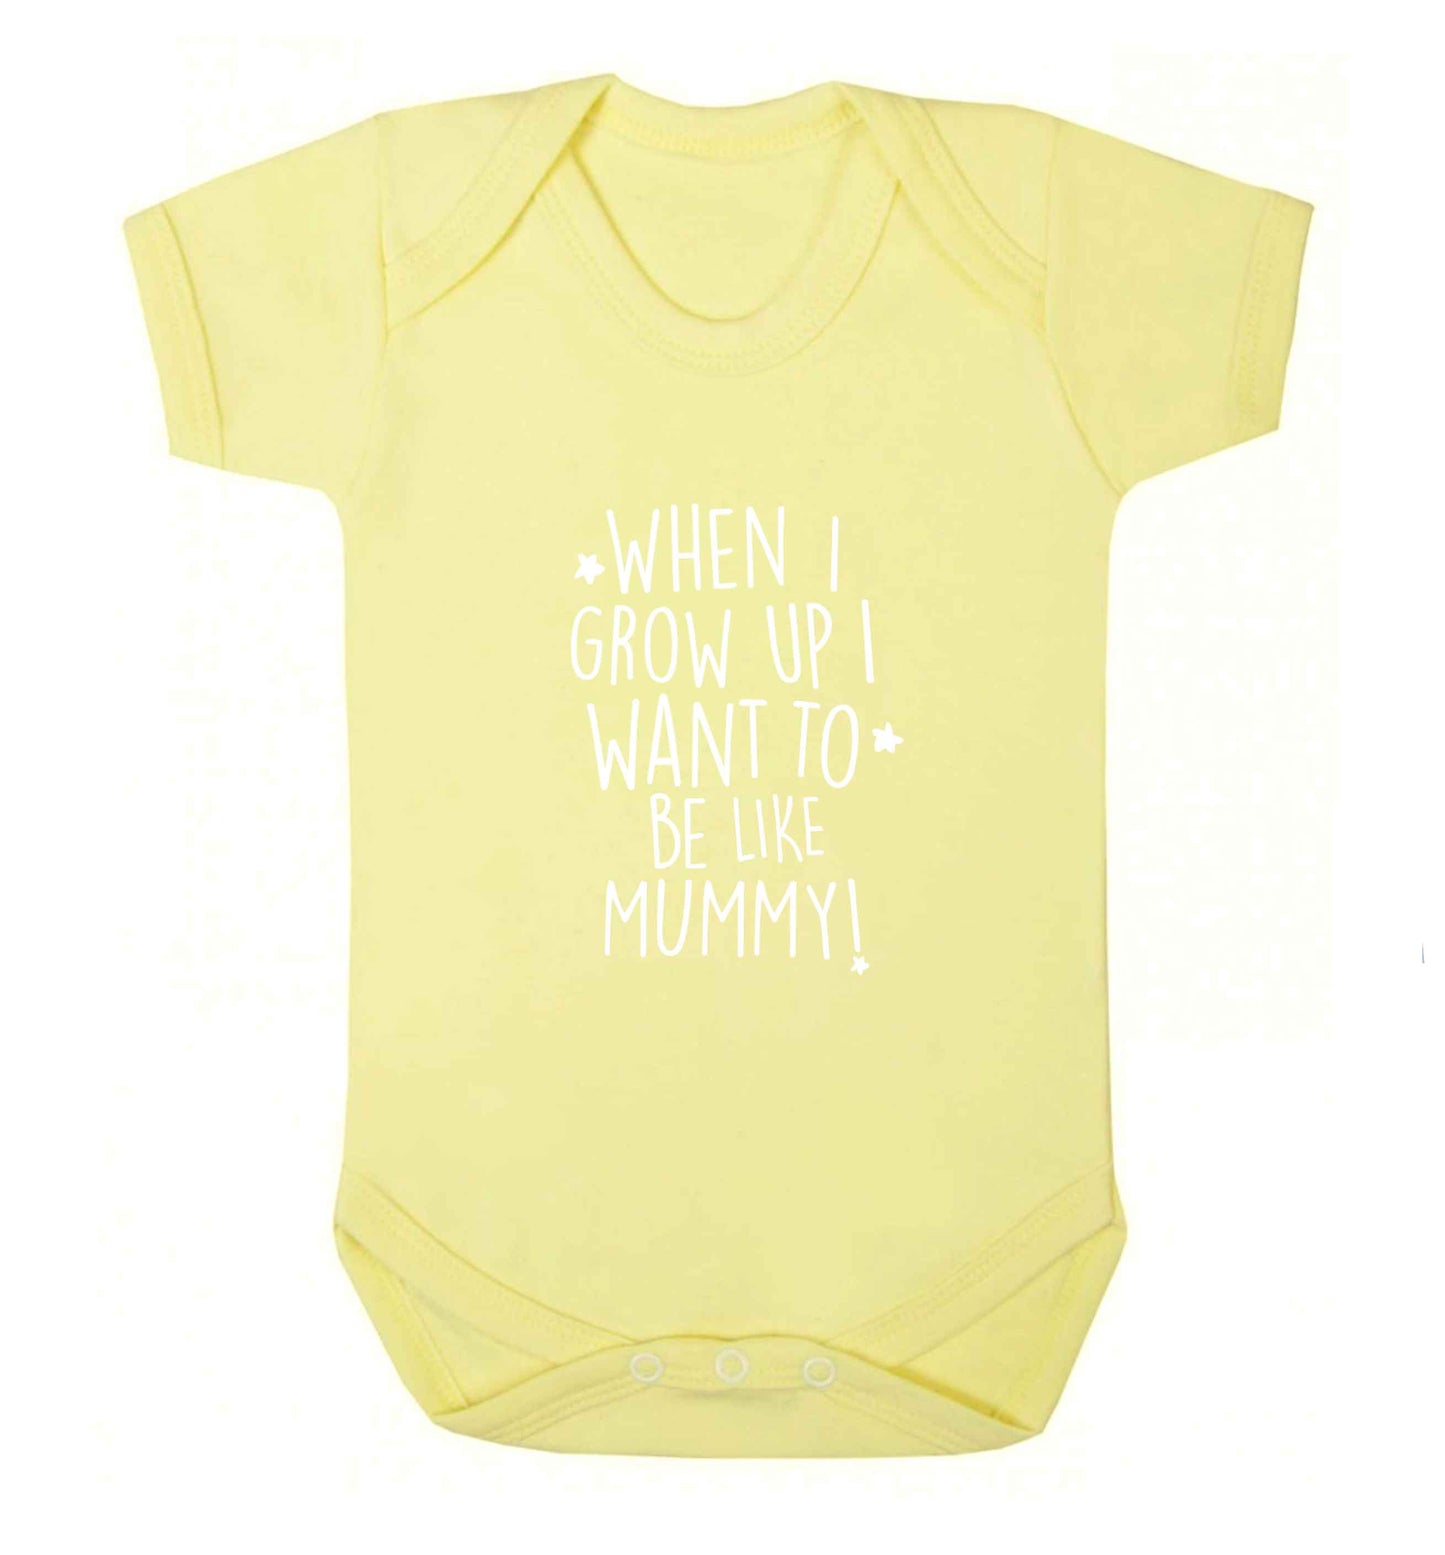 When I grow up I want to be like my mummy baby vest pale yellow 18-24 months